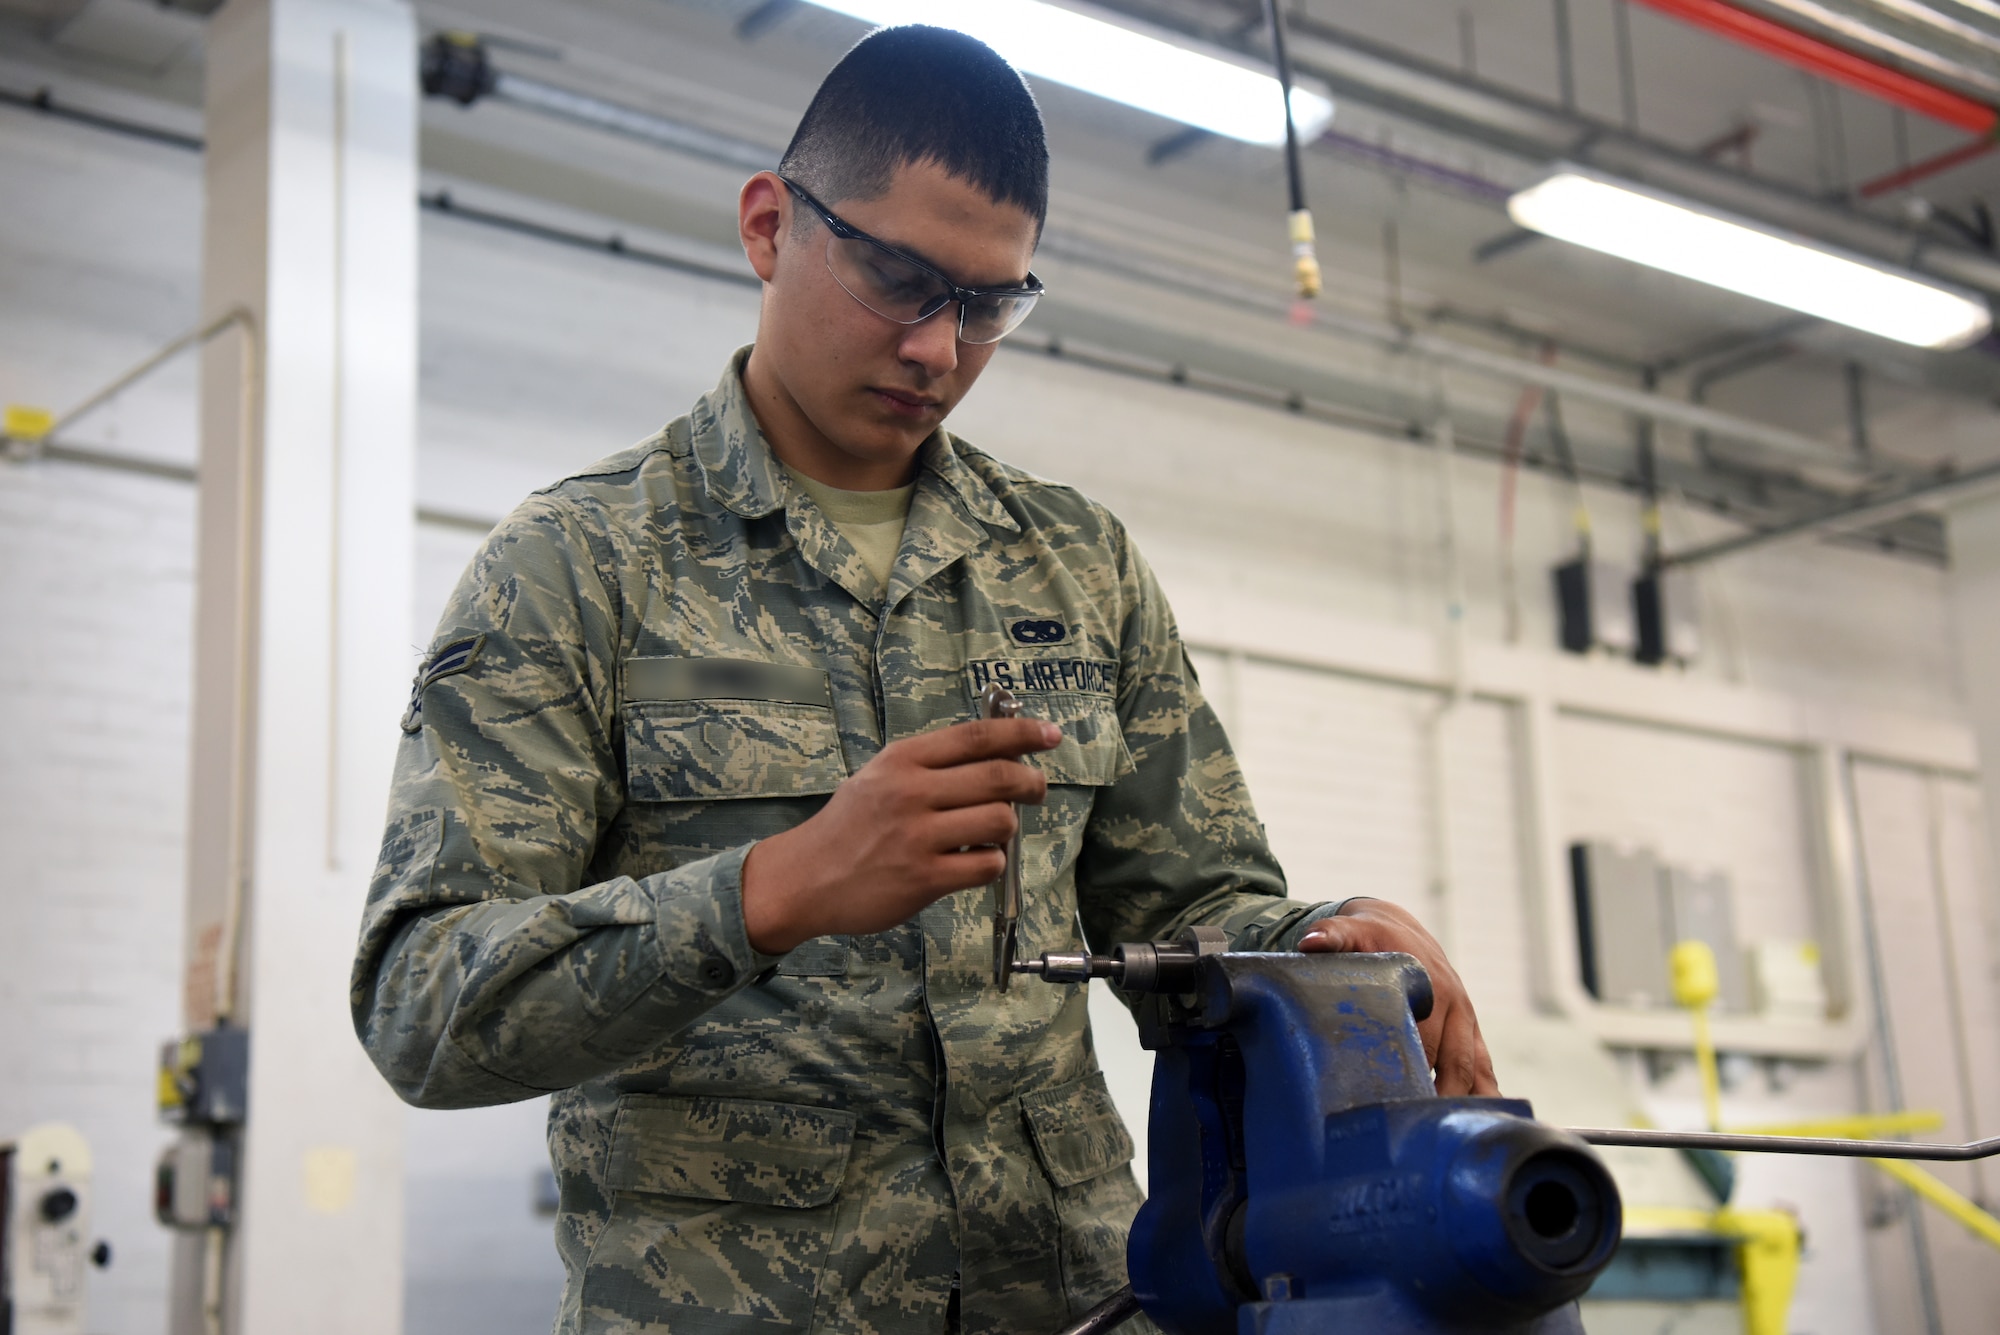 A 48th Aircraft Structural Maintenance Airman tightens a fastener on a control line at Royal Air Force Lakenheath, England, May 22, 2018. Aircraft Structural Maintainers work on both the external skin of the aircraft and the internal support structure that holds the exterior in place.